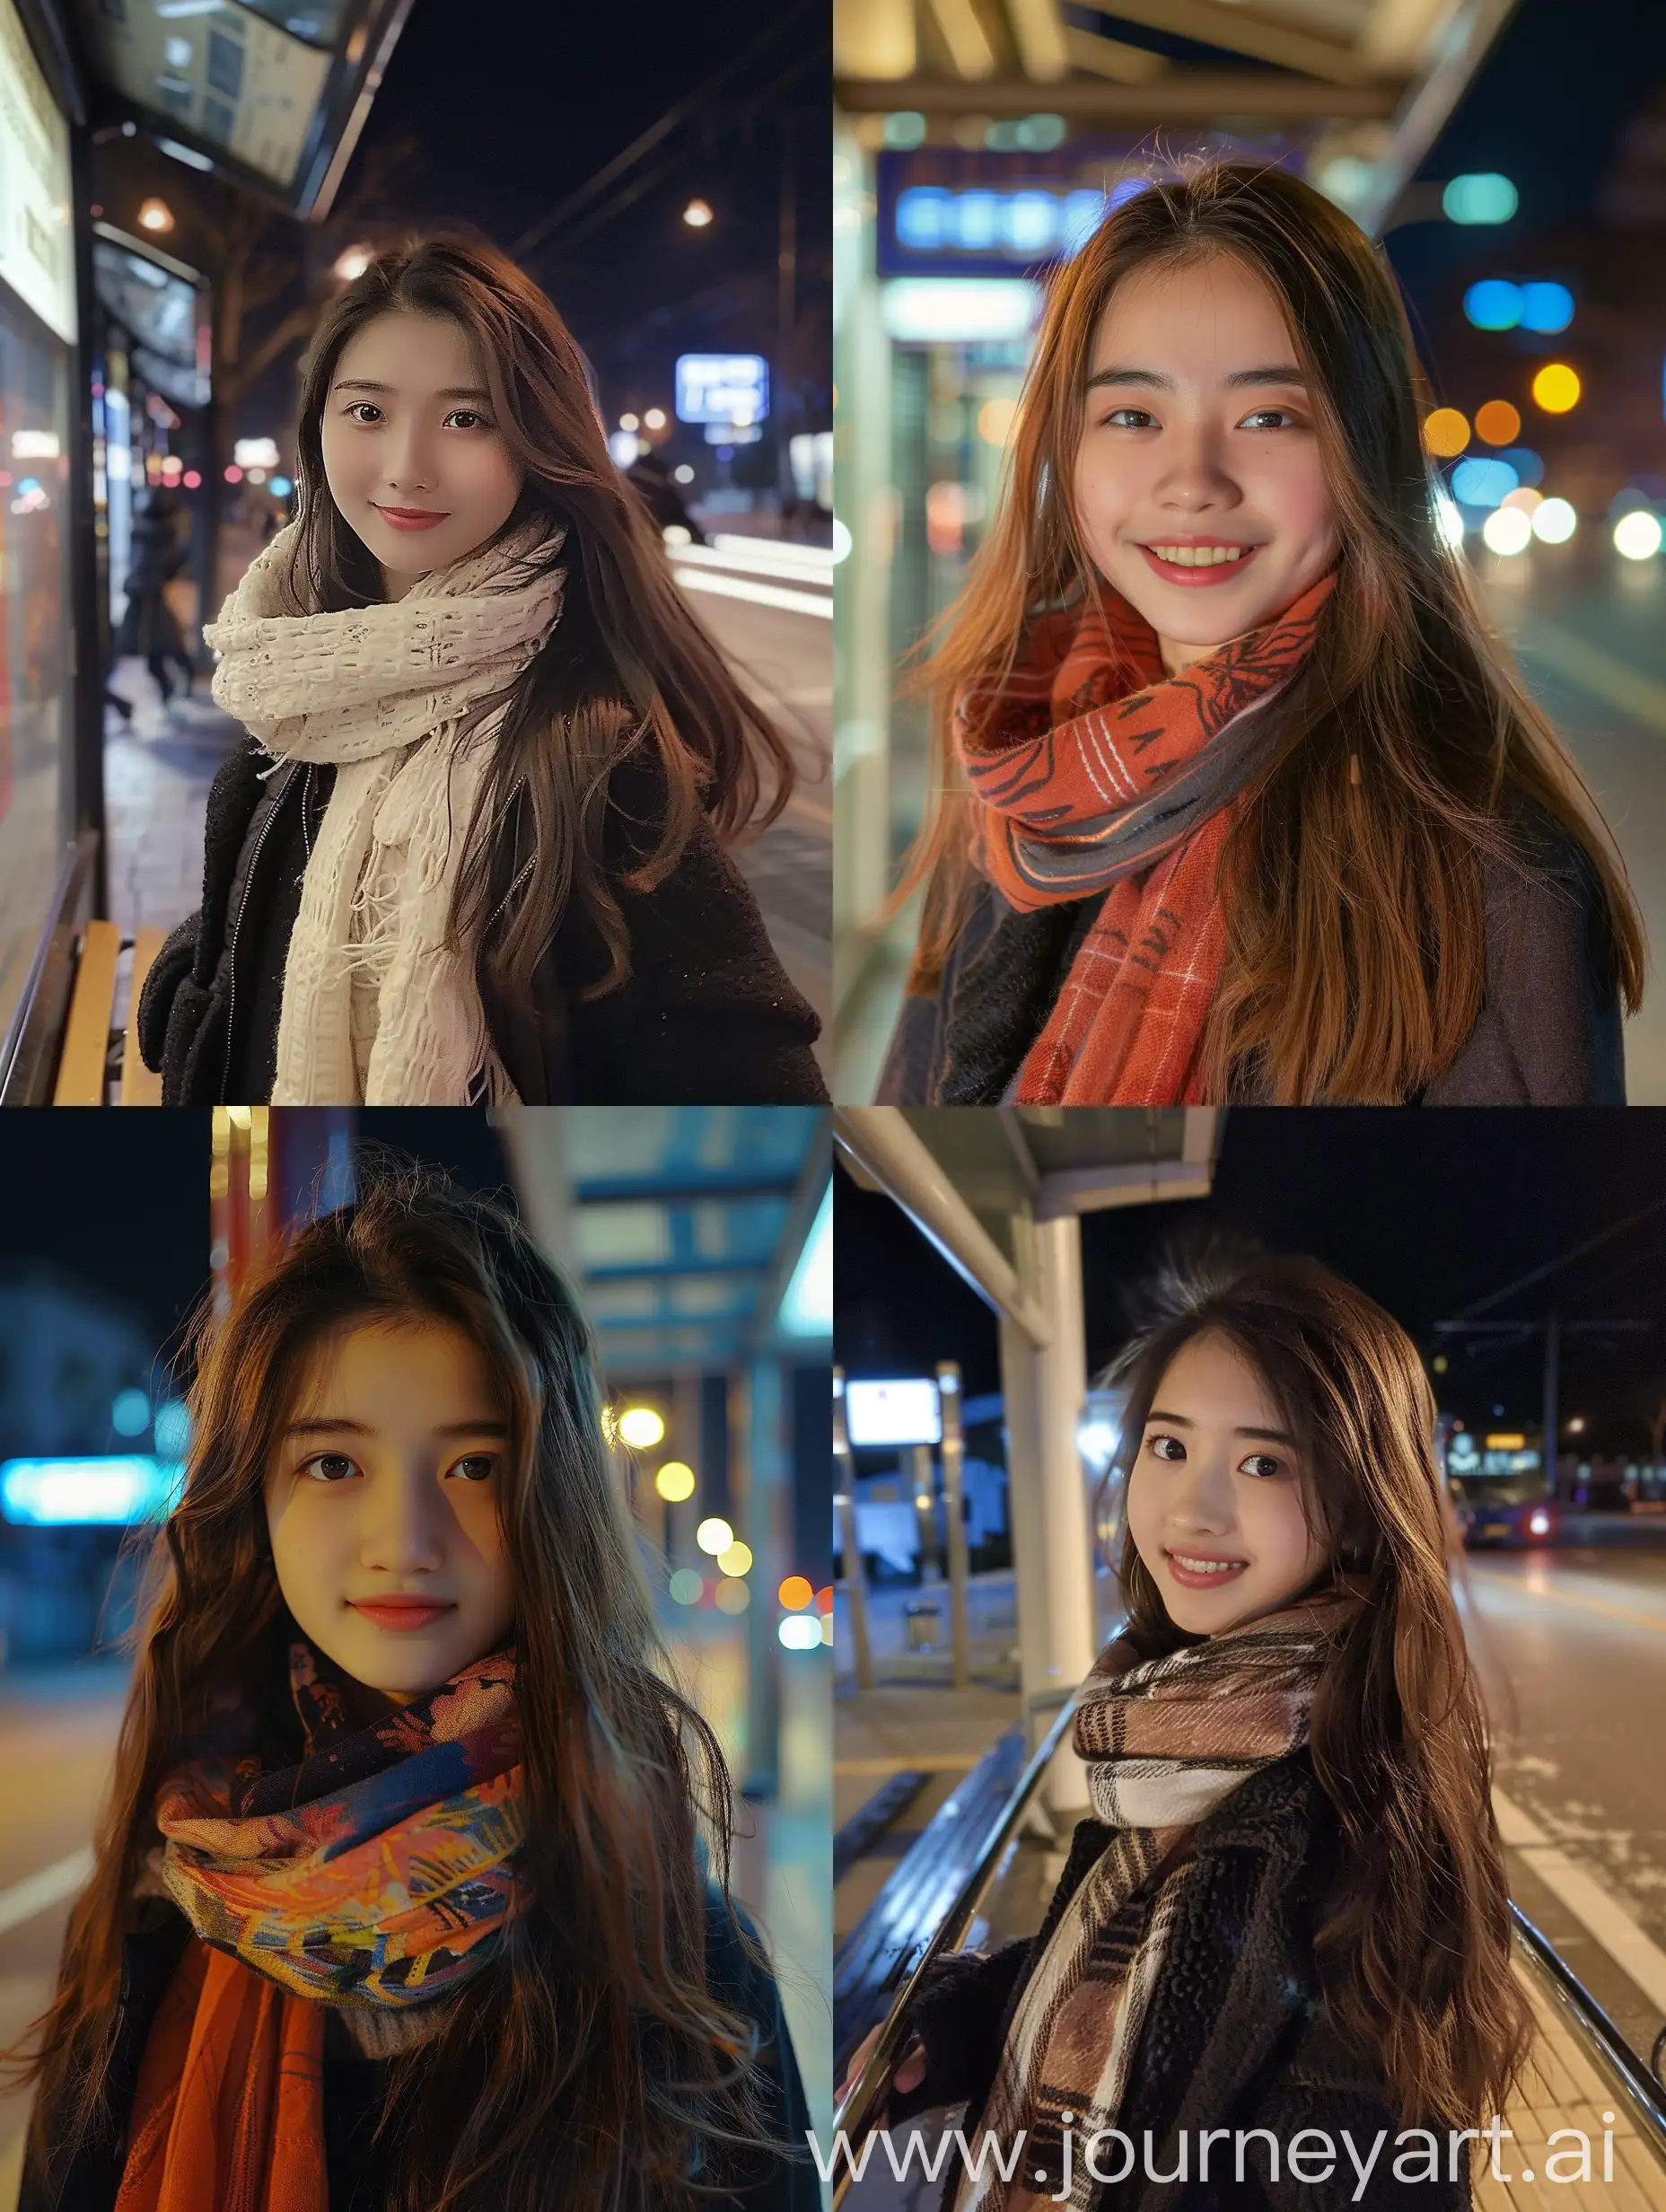 Chinese-Teenage-Girl-with-Scarf-Smiling-at-Night-Bus-Stop